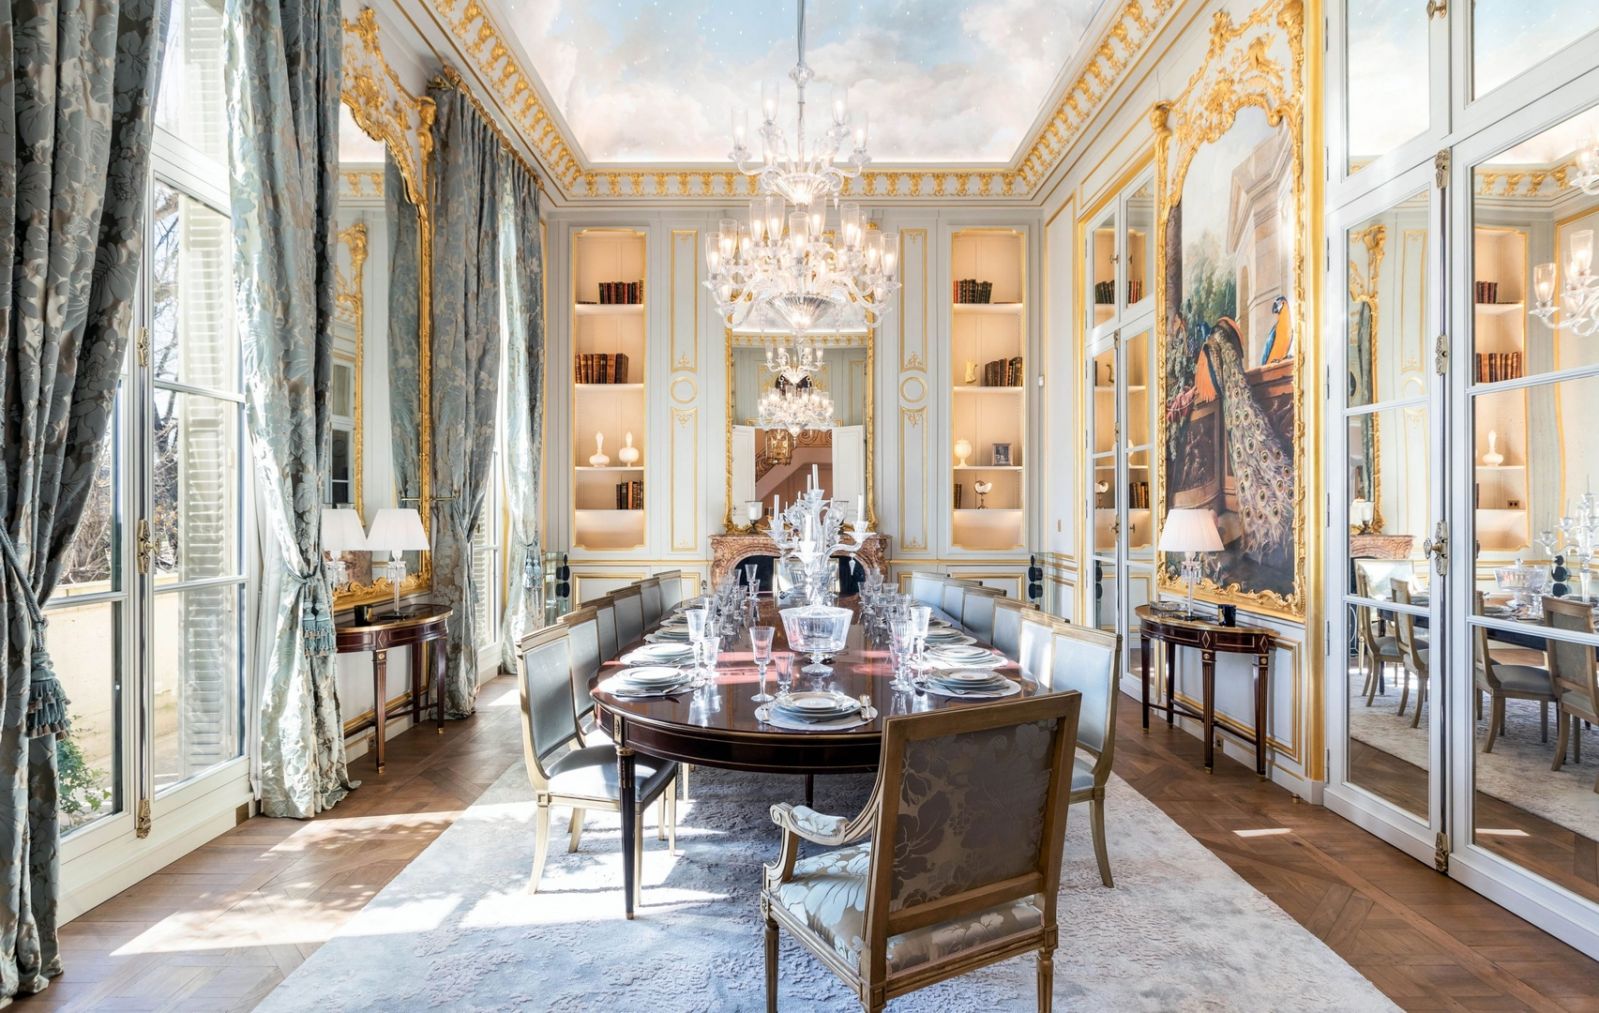 Comfort meets opulence in this lavish dining room